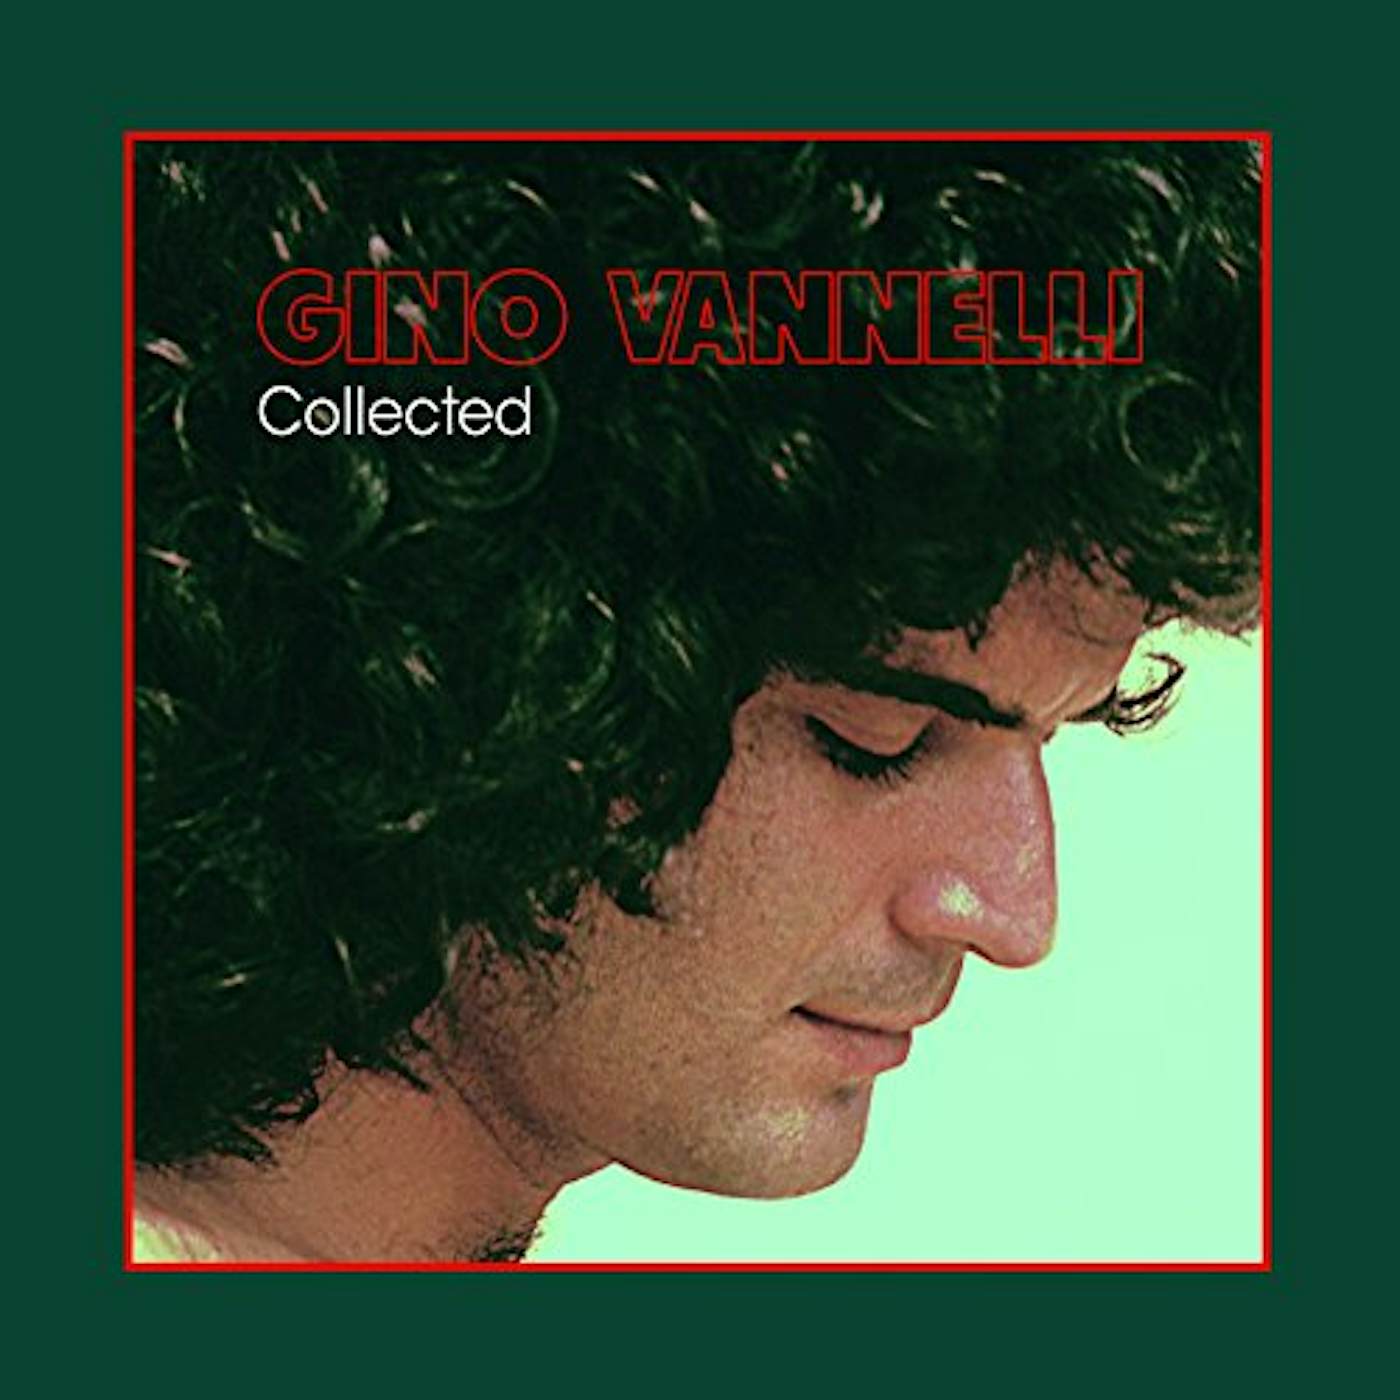 Gino Vannelli Collected Vinyl Record